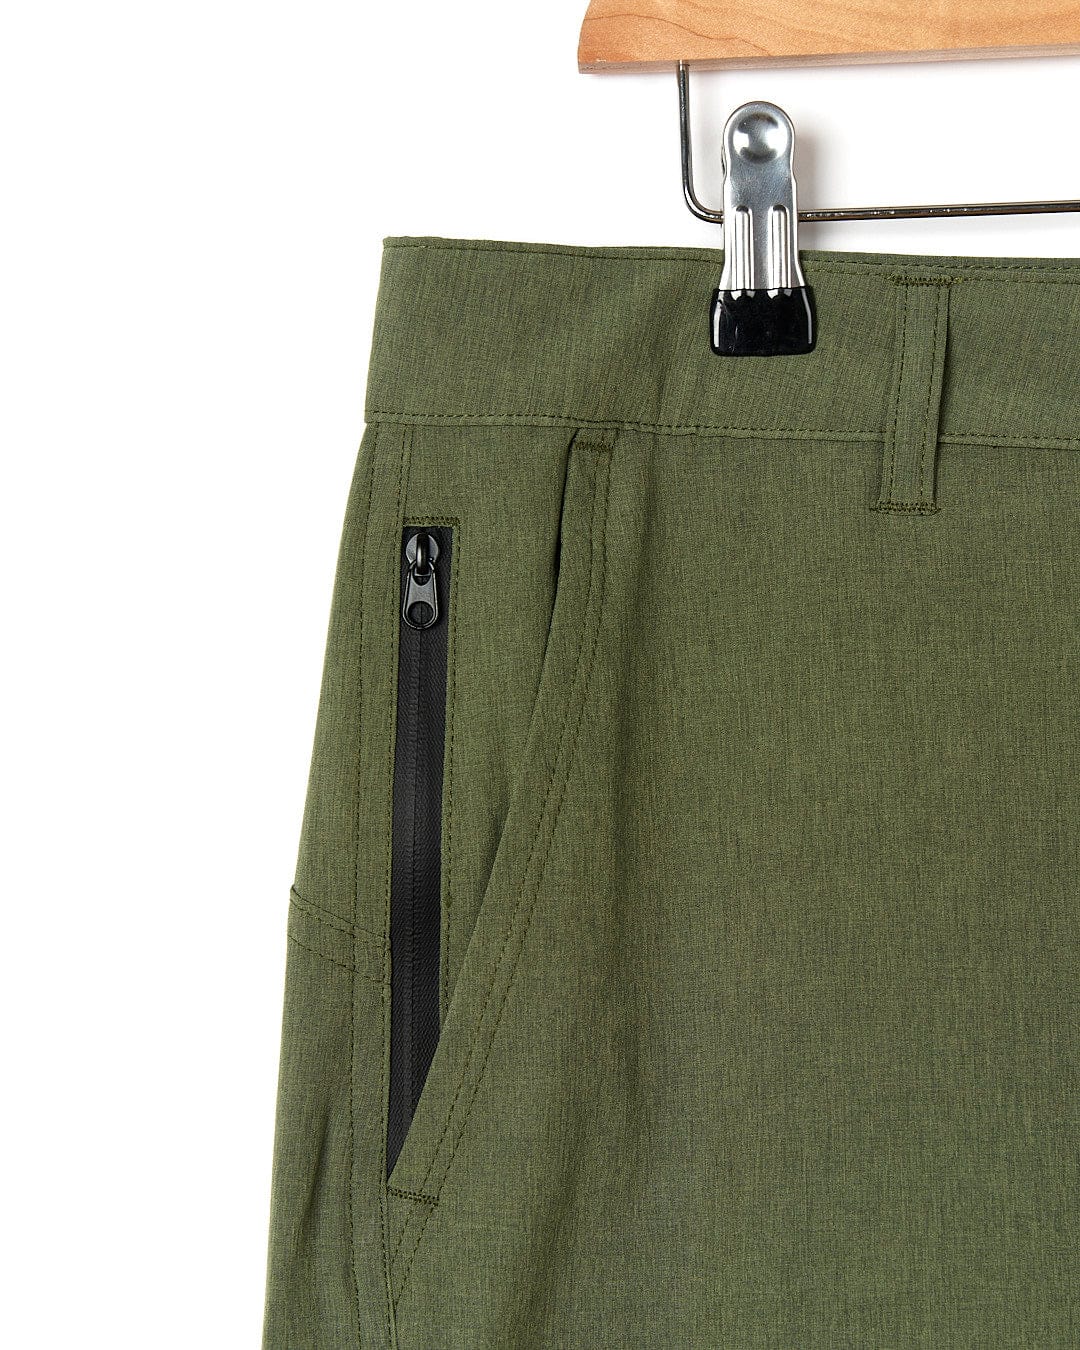 Essential men's shorts, the Cargo Amphibian II - Mens Boardshort - Dark Green from Saltrock, are neatly displayed on a hanger.